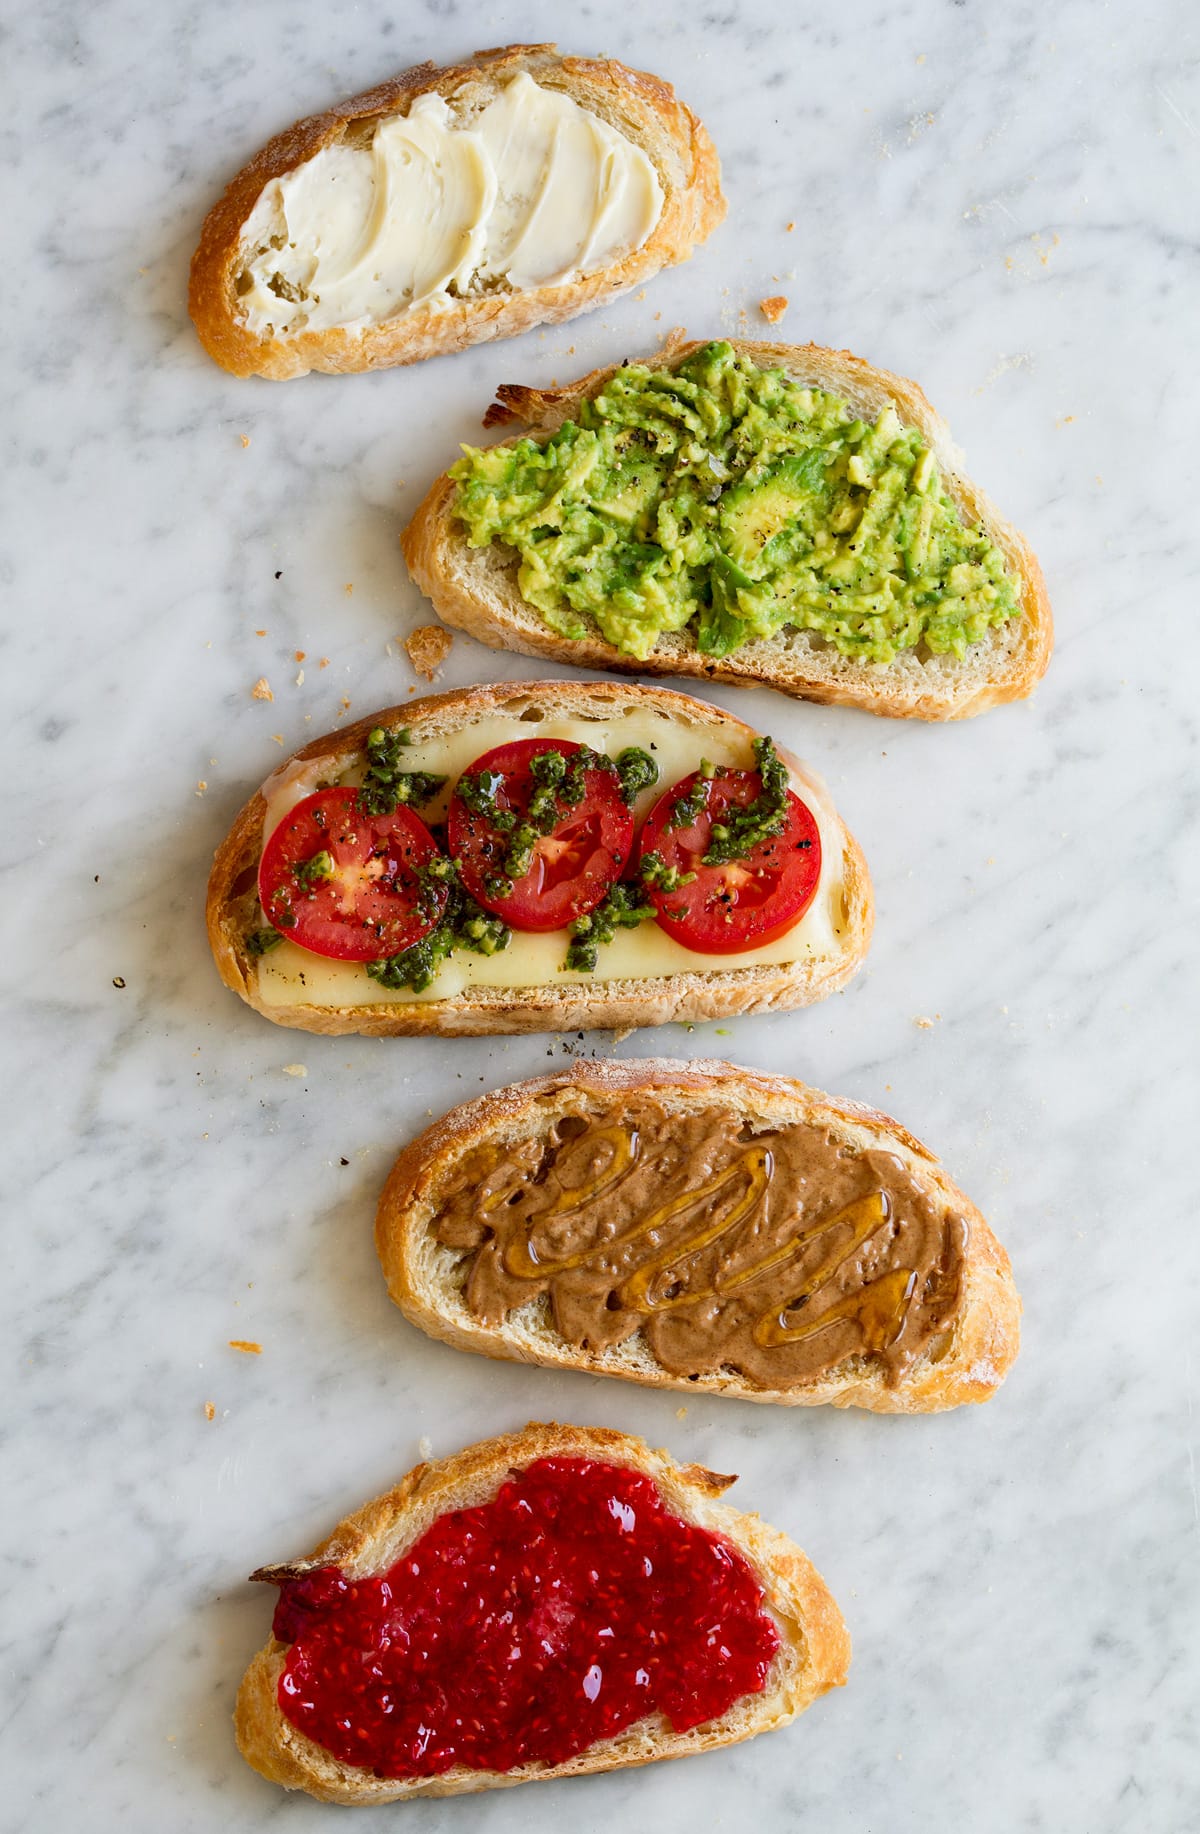 Different toppings ideas shown on slices of no knead bread.